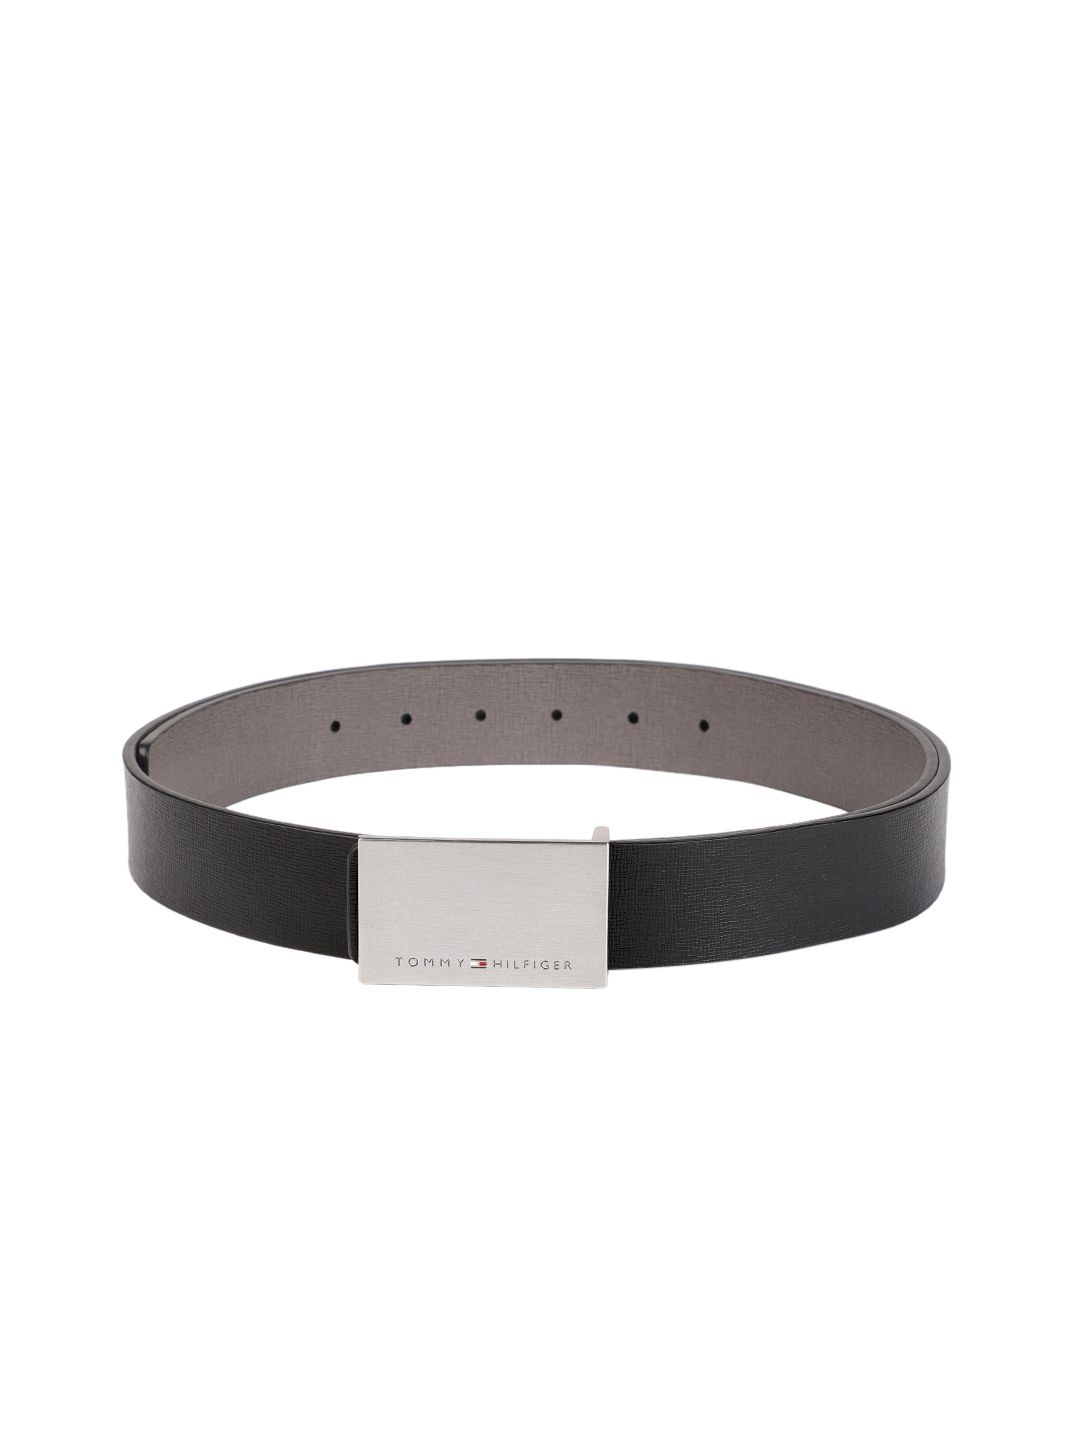 Tommy Hilfiger Unisex Black & Grey Textured Reversible Leather Belt Price in India